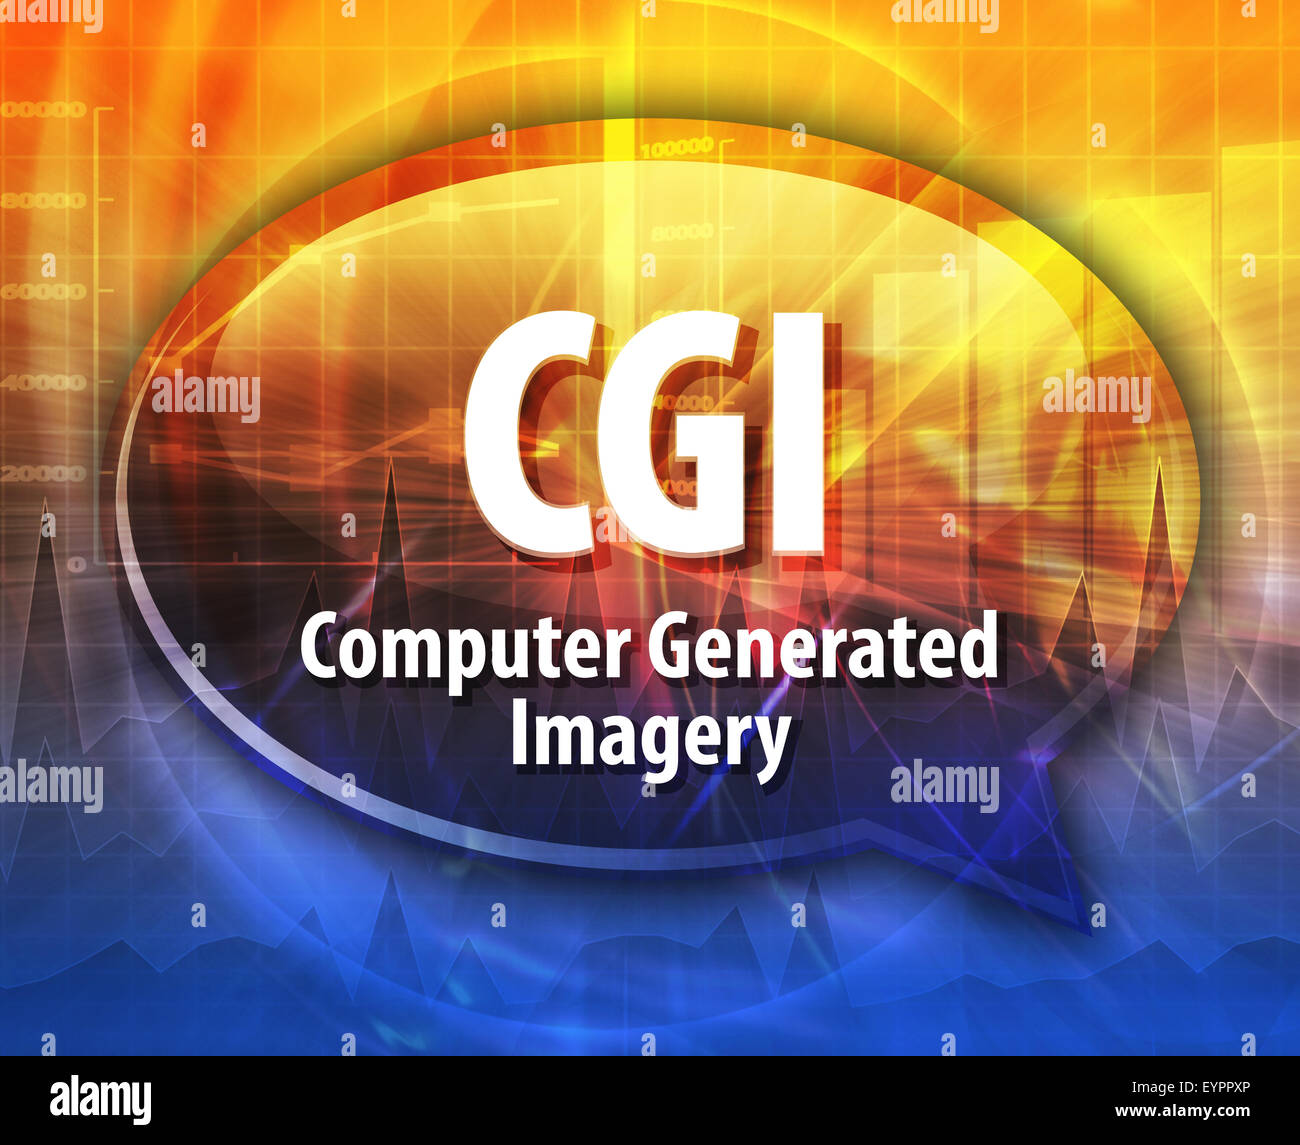 Speech bubble illustration of information technology acronym abbreviation term definition CGI Computer Generated Imagery Stock Photo